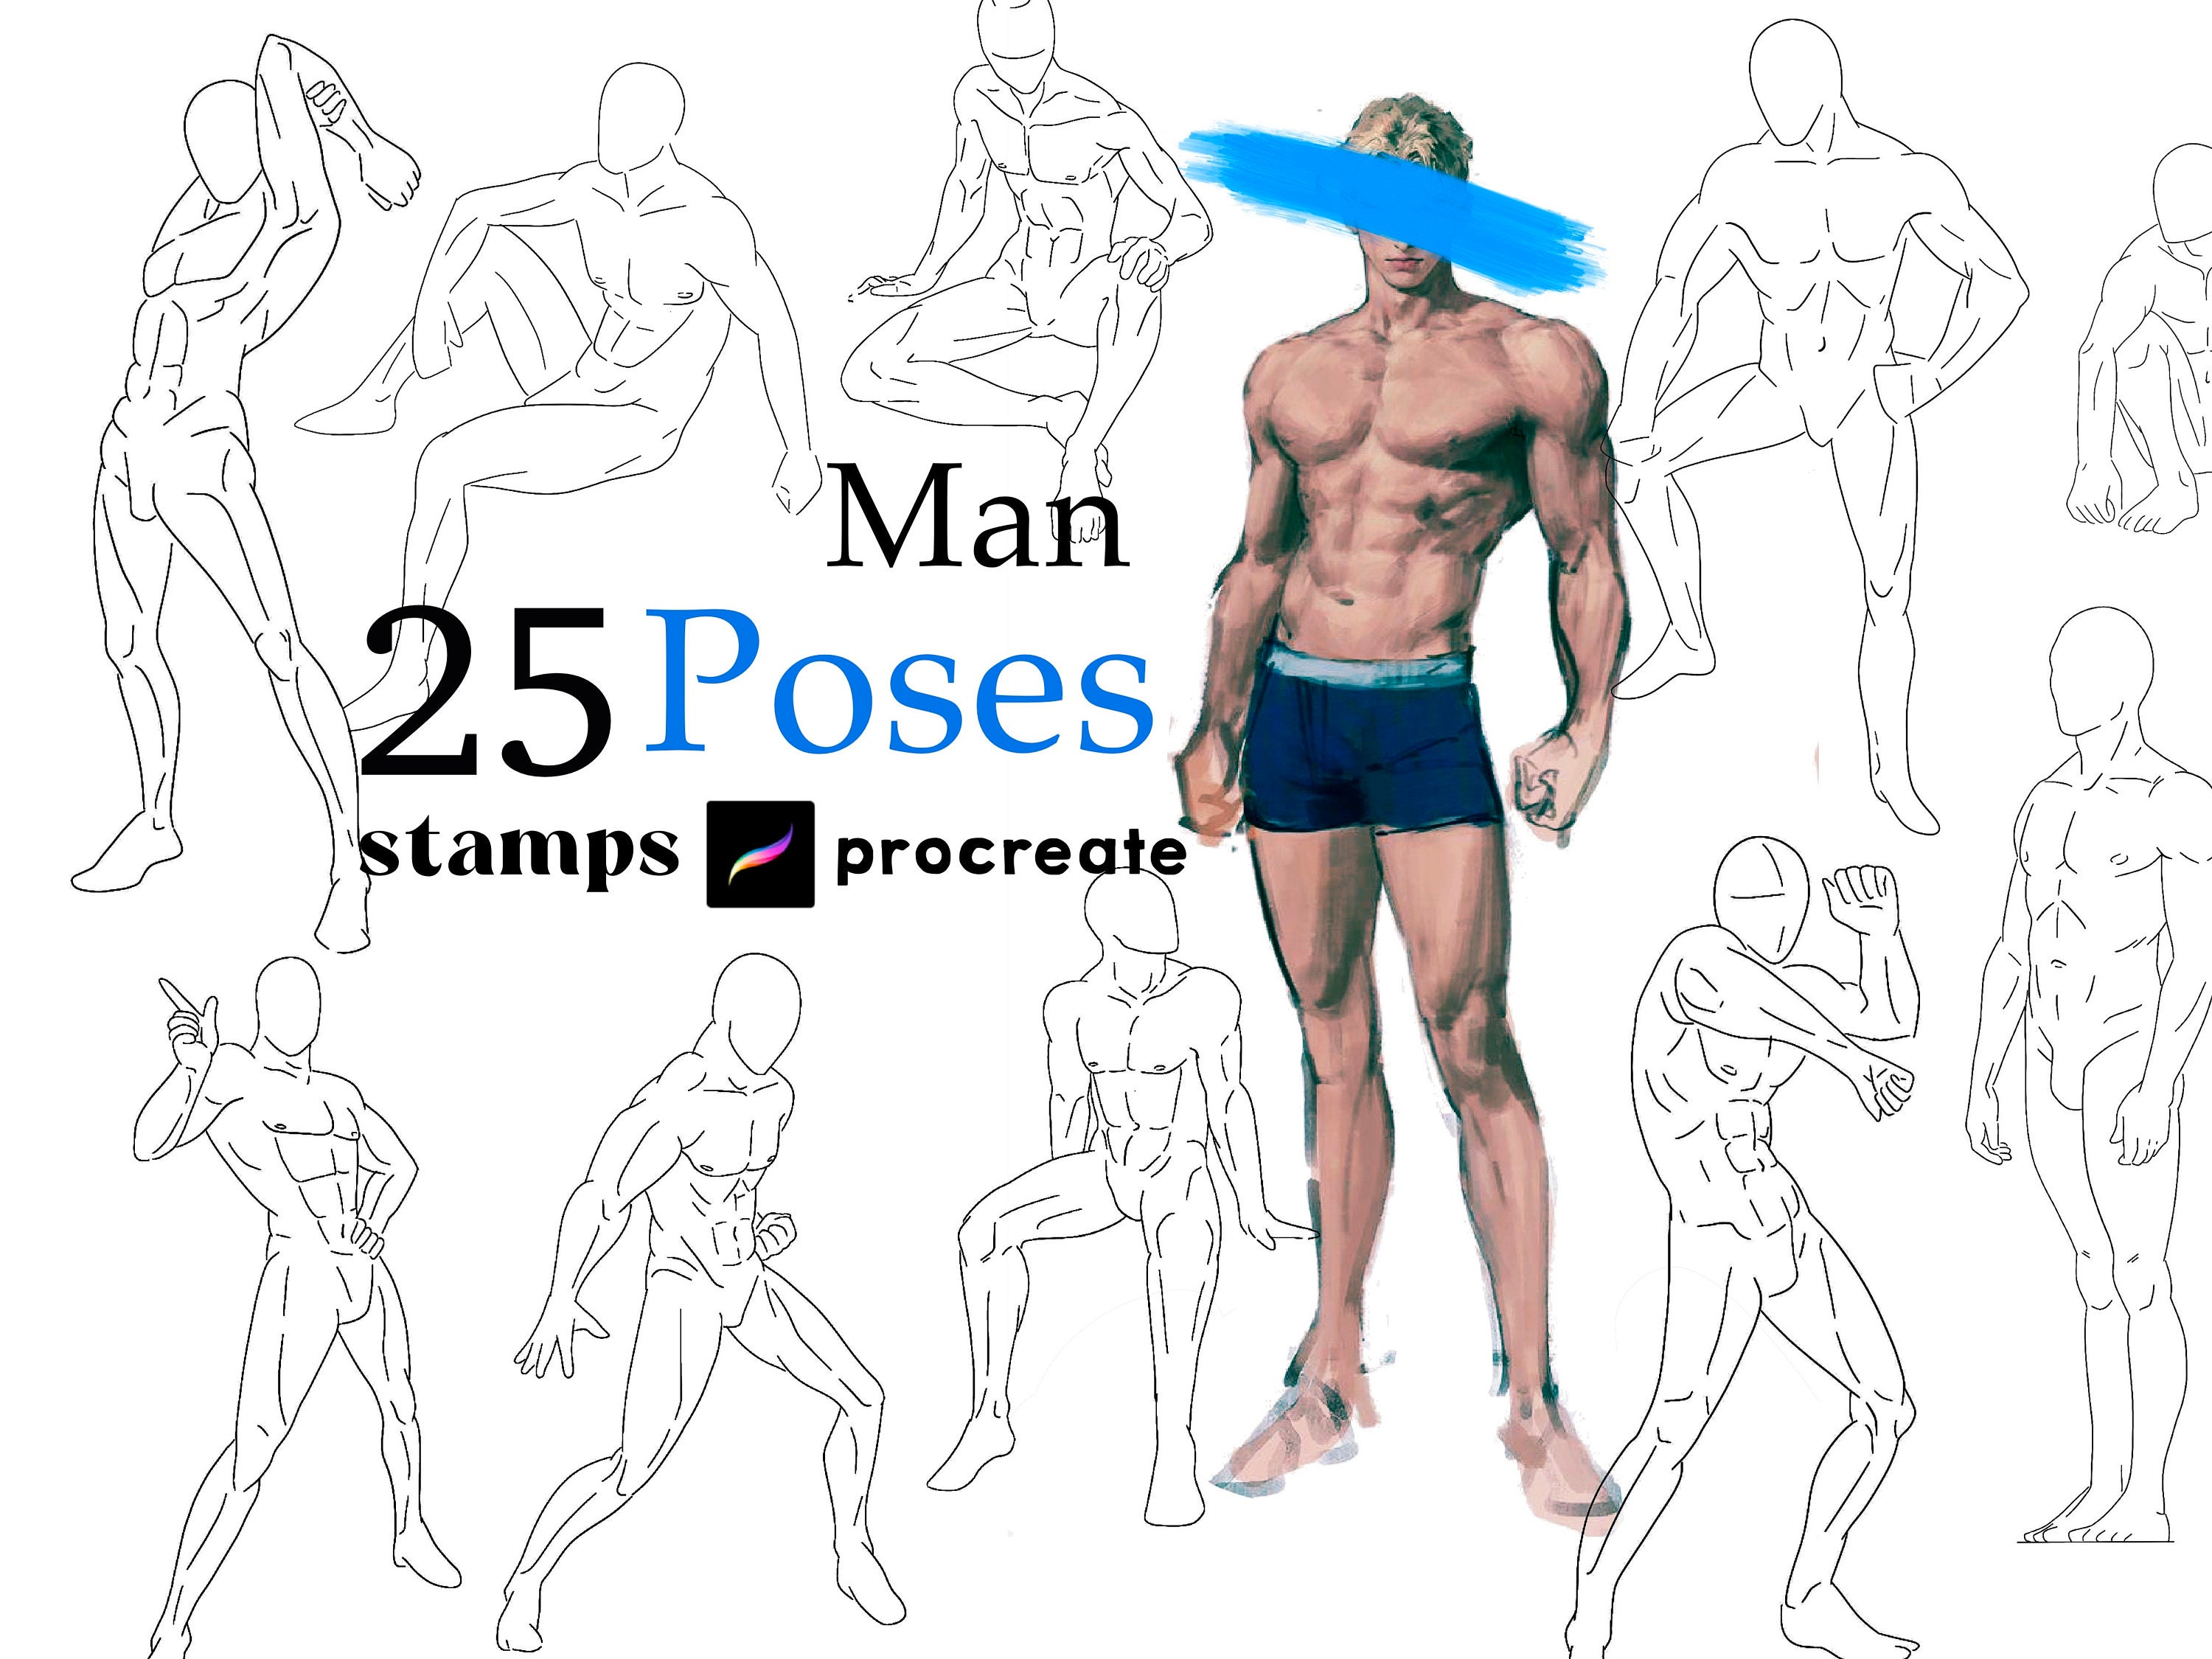 Update More Than Male Anime Body Reference Tdesign Edu Vn